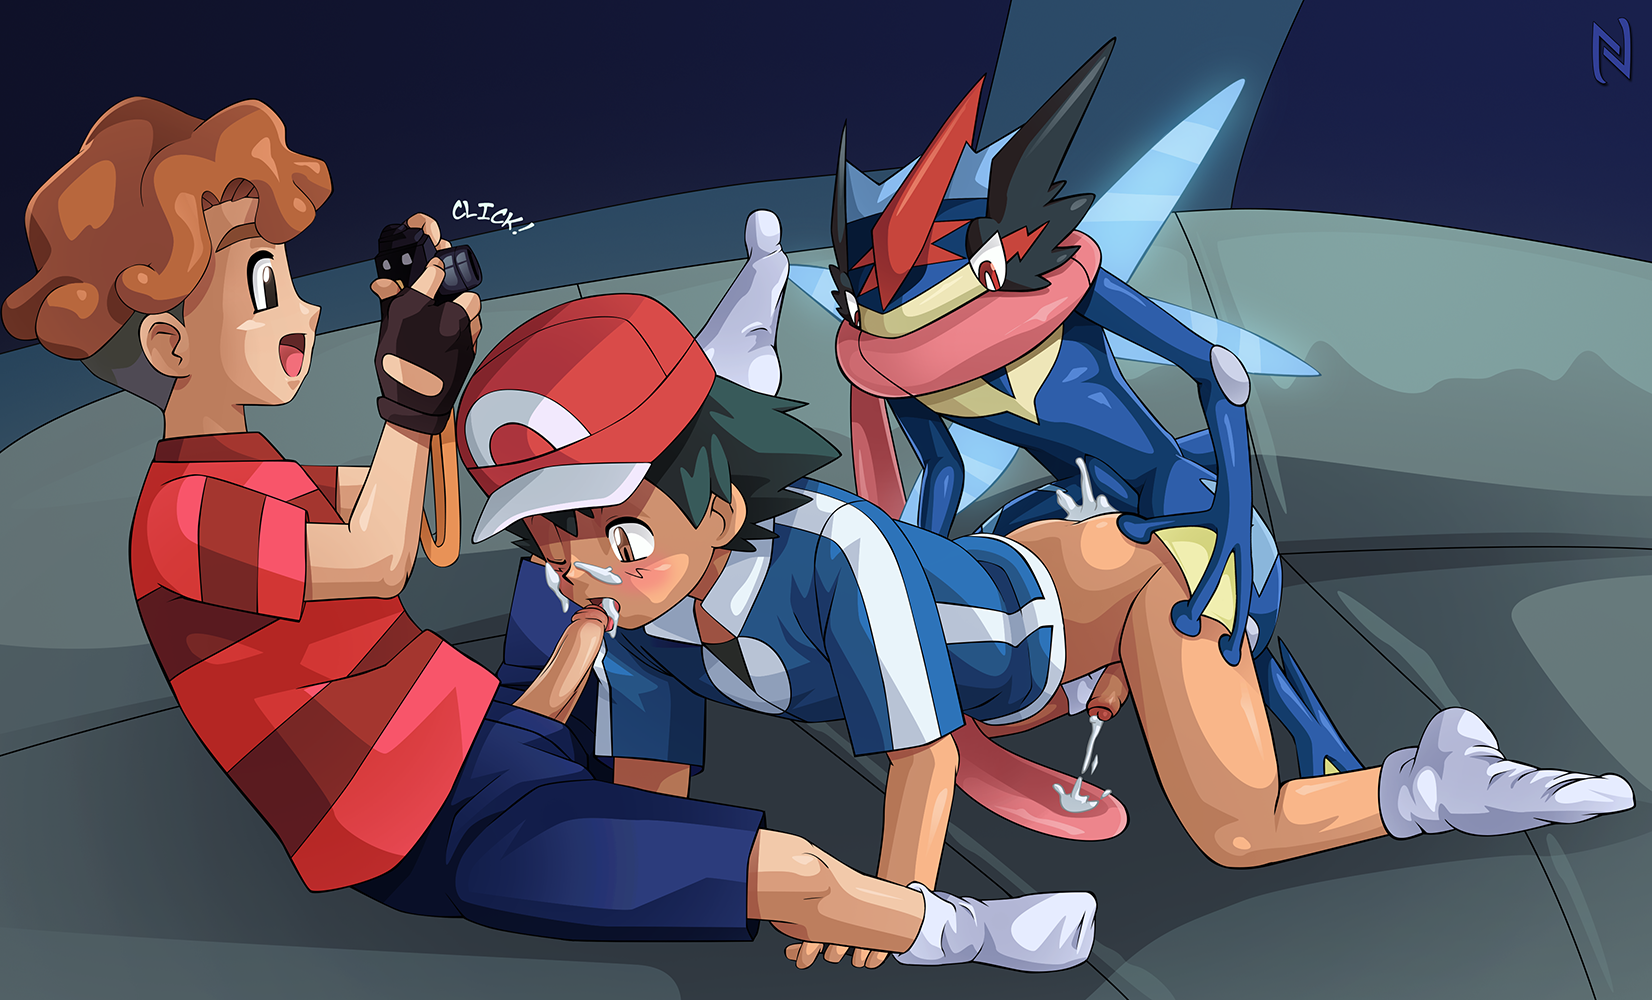 Ash Ketchum Character Ask 5. Posts by Nearphotison. 